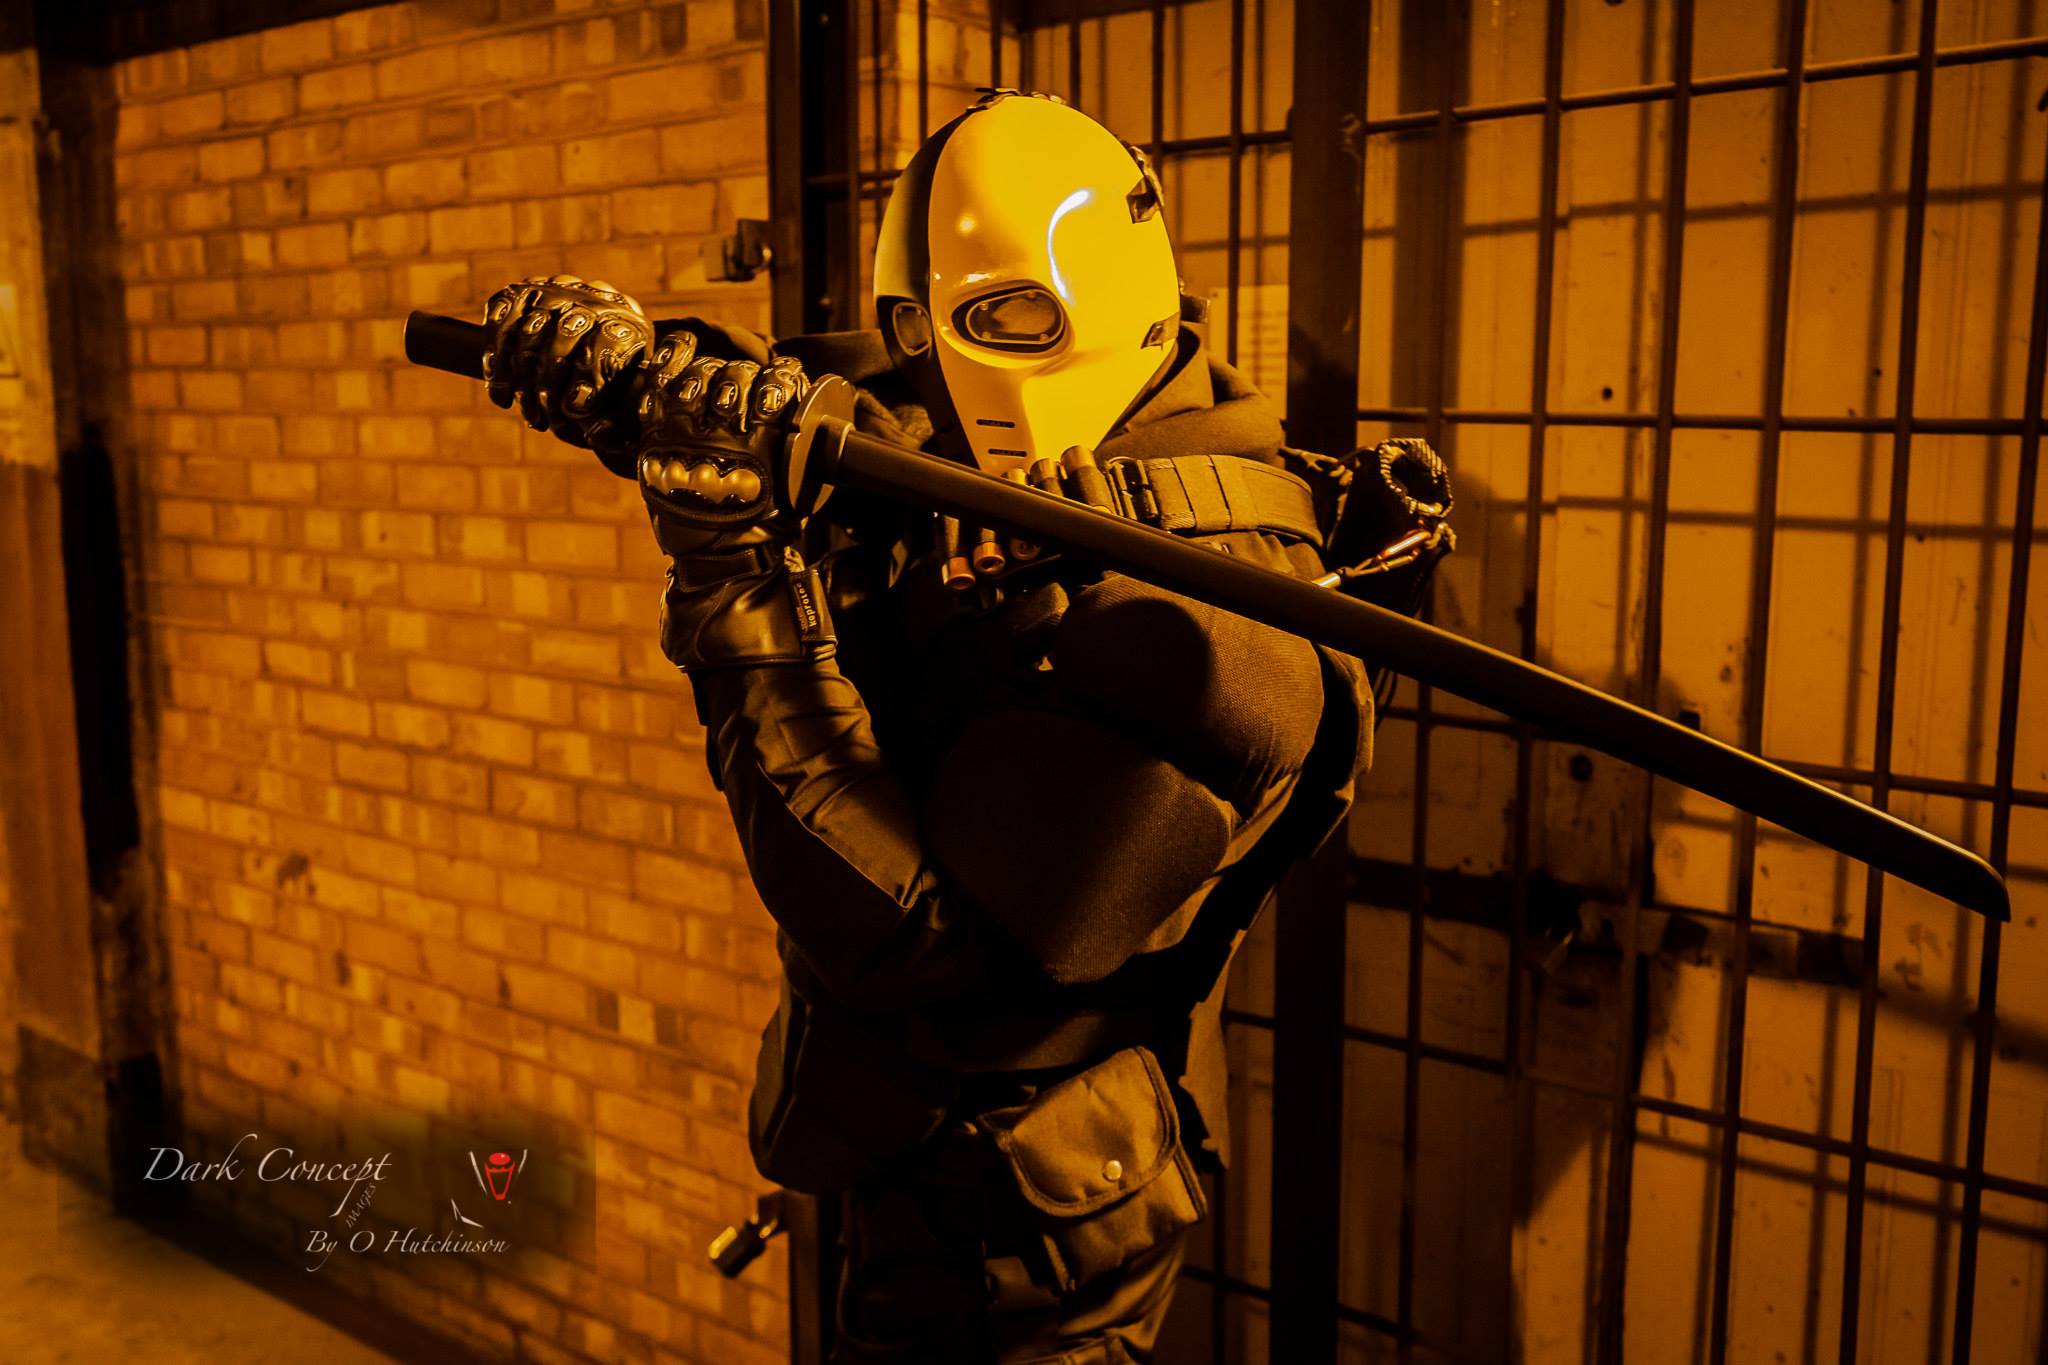 Martin J. Thomas playing Deathstroke at the 2014 Winter LFCC.